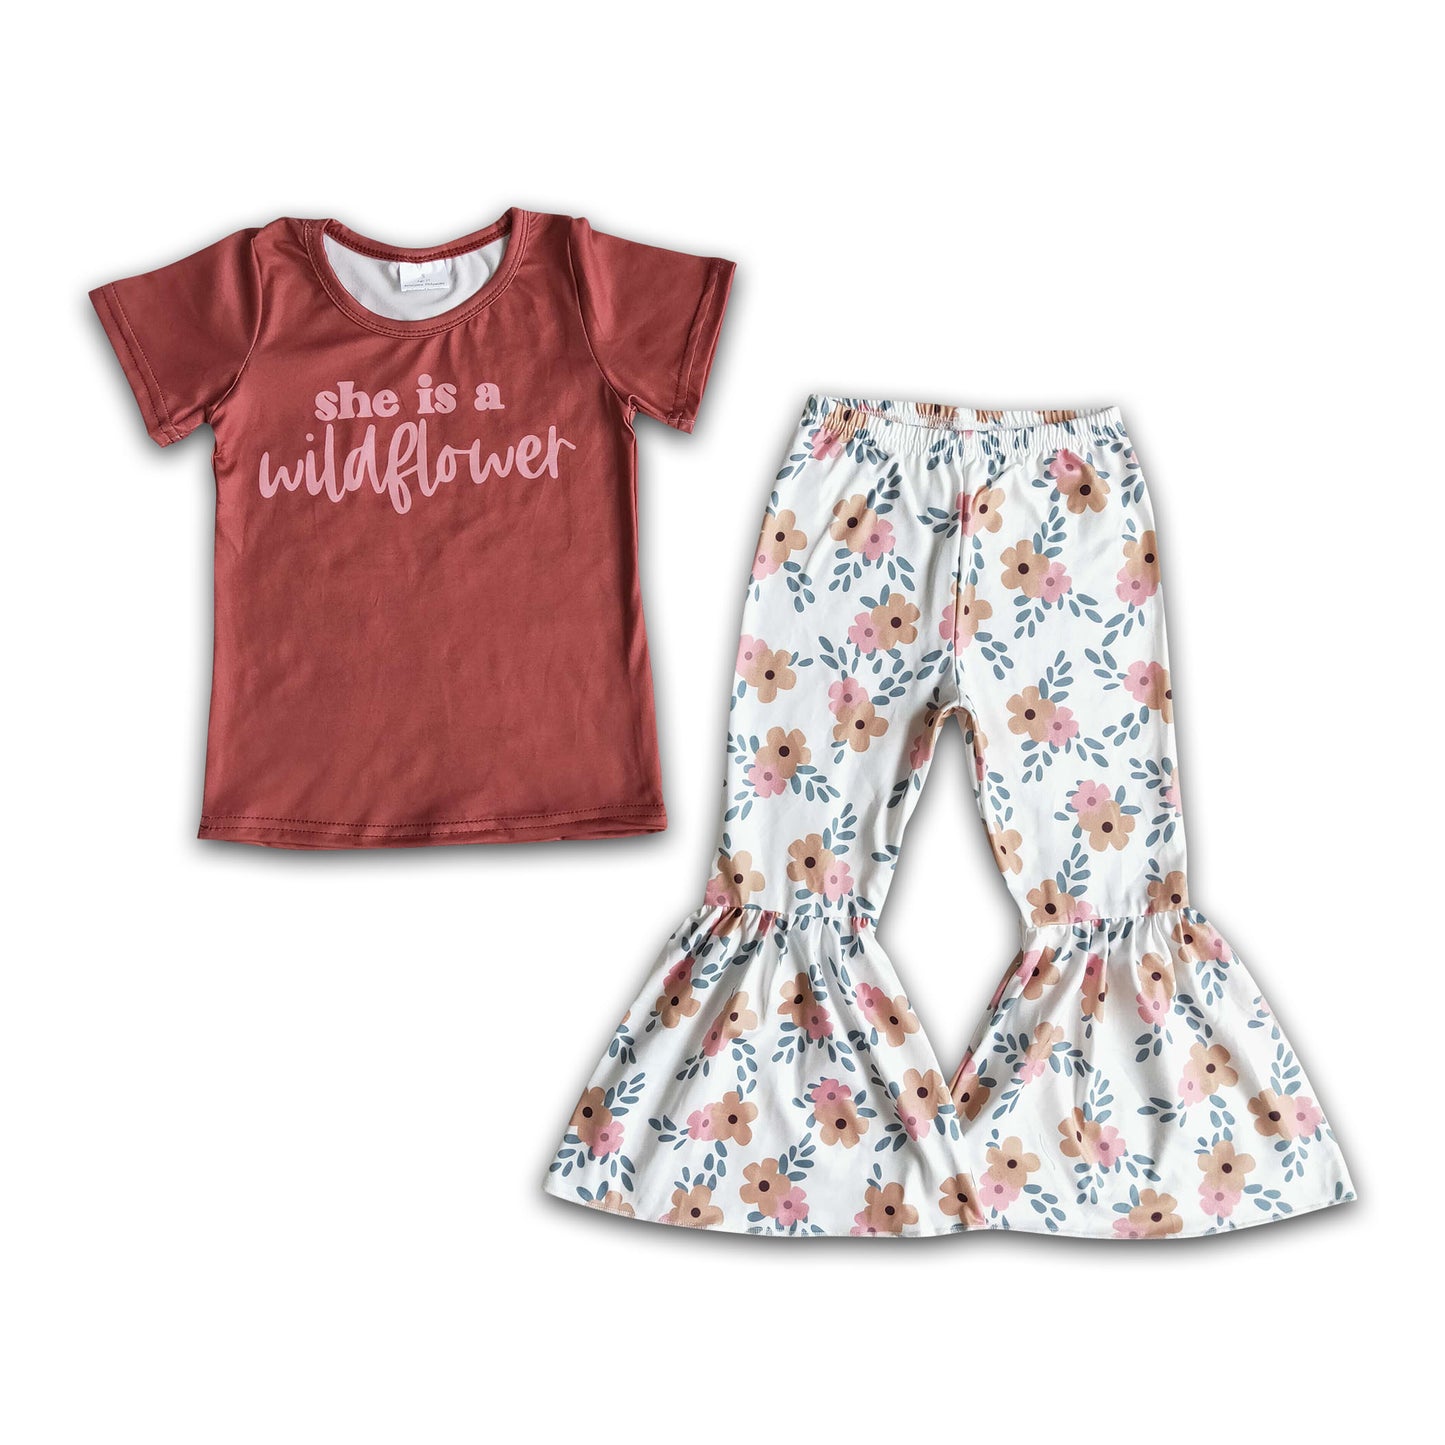 She is a wild flower shirt floral bell bottom pants toddler girls spring clothing